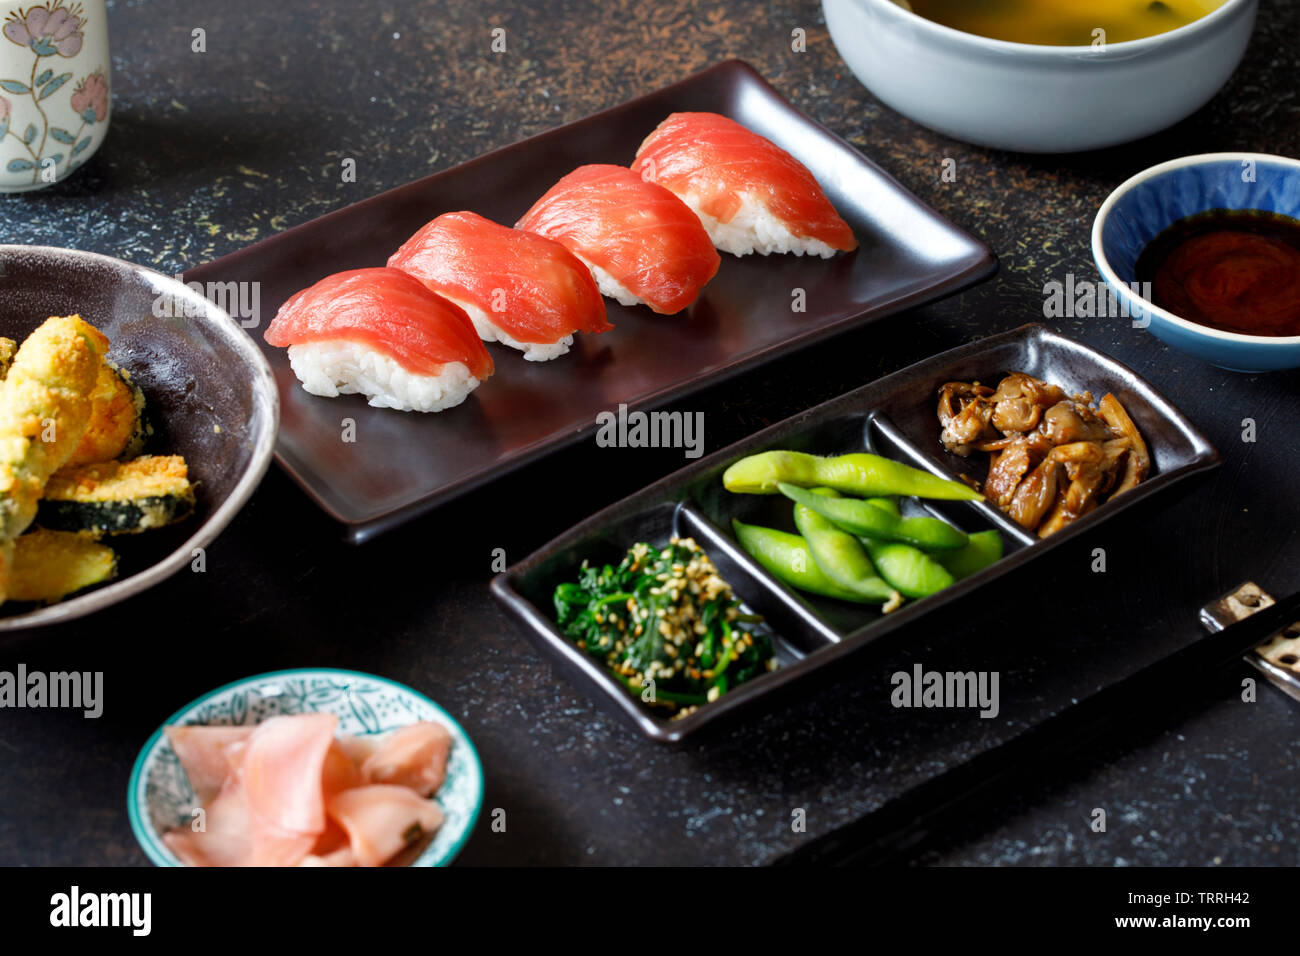 Japanes lunch with sushi and vegetables Stock Photo